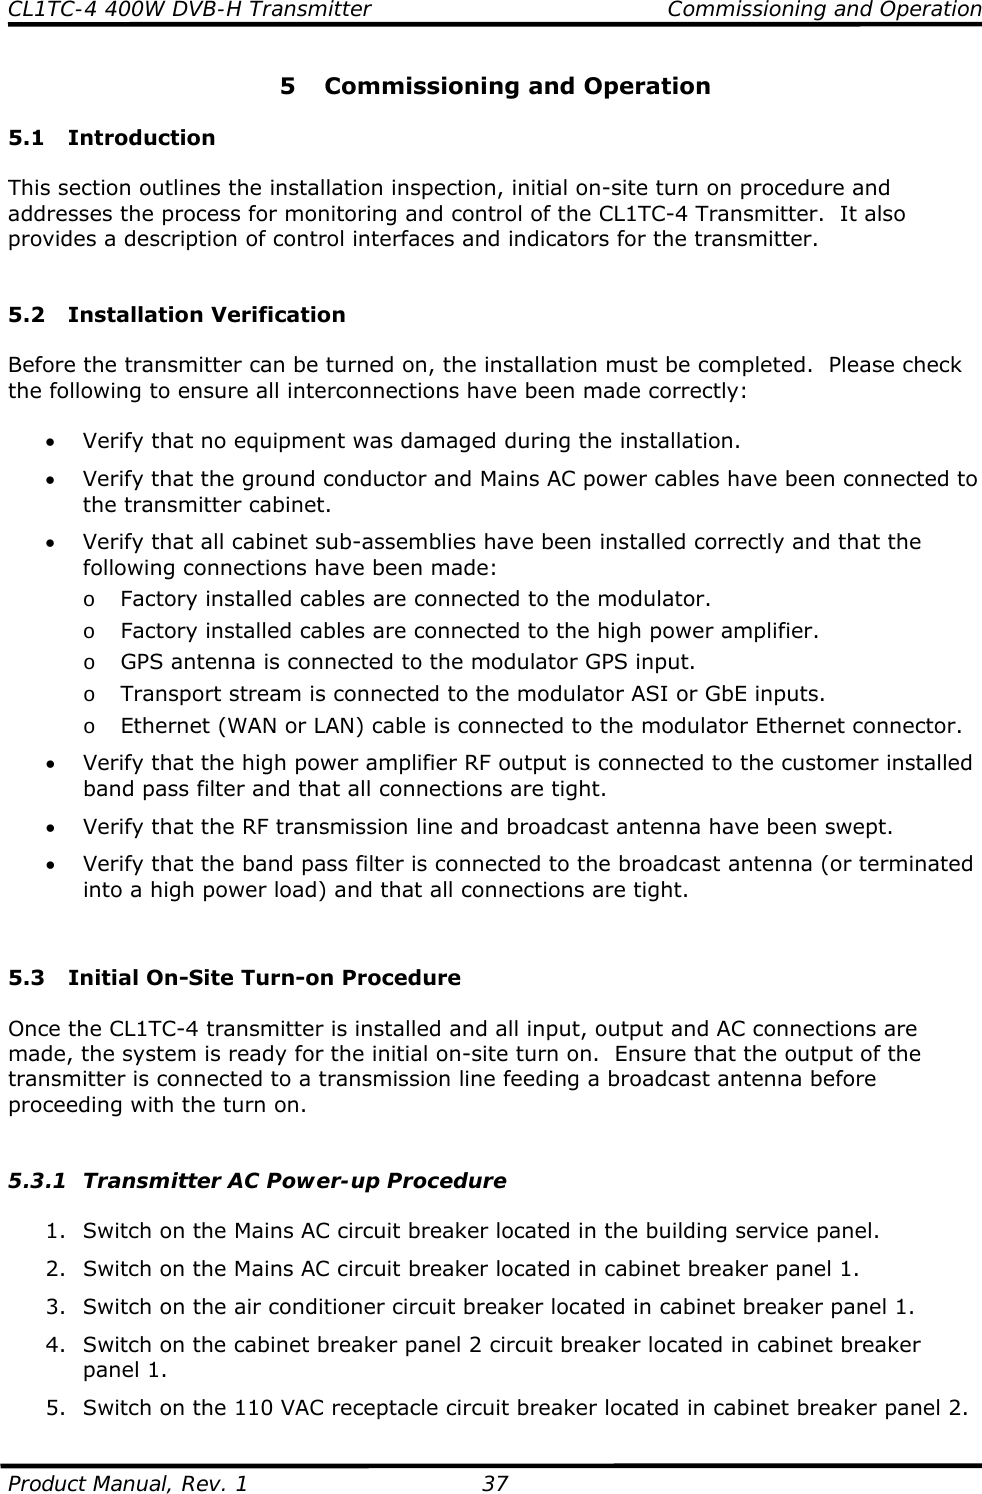 CL1TC-4 400W DVB-H Transmitter    Commissioning and Operation  Product Manual, Rev. 1  37 5 Commissioning and Operation  5.1 Introduction  This section outlines the installation inspection, initial on-site turn on procedure and addresses the process for monitoring and control of the CL1TC-4 Transmitter.  It also provides a description of control interfaces and indicators for the transmitter.   5.2 Installation Verification  Before the transmitter can be turned on, the installation must be completed.  Please check the following to ensure all interconnections have been made correctly:  • Verify that no equipment was damaged during the installation. • Verify that the ground conductor and Mains AC power cables have been connected to the transmitter cabinet. • Verify that all cabinet sub-assemblies have been installed correctly and that the following connections have been made: o Factory installed cables are connected to the modulator. o Factory installed cables are connected to the high power amplifier. o GPS antenna is connected to the modulator GPS input. o Transport stream is connected to the modulator ASI or GbE inputs. o Ethernet (WAN or LAN) cable is connected to the modulator Ethernet connector. • Verify that the high power amplifier RF output is connected to the customer installed band pass filter and that all connections are tight. • Verify that the RF transmission line and broadcast antenna have been swept. • Verify that the band pass filter is connected to the broadcast antenna (or terminated into a high power load) and that all connections are tight.   5.3 Initial On-Site Turn-on Procedure  Once the CL1TC-4 transmitter is installed and all input, output and AC connections are made, the system is ready for the initial on-site turn on.  Ensure that the output of the transmitter is connected to a transmission line feeding a broadcast antenna before proceeding with the turn on.   5.3.1 Transmitter AC Power-up Procedure  1. Switch on the Mains AC circuit breaker located in the building service panel. 2. Switch on the Mains AC circuit breaker located in cabinet breaker panel 1. 3. Switch on the air conditioner circuit breaker located in cabinet breaker panel 1. 4. Switch on the cabinet breaker panel 2 circuit breaker located in cabinet breaker panel 1. 5. Switch on the 110 VAC receptacle circuit breaker located in cabinet breaker panel 2. 